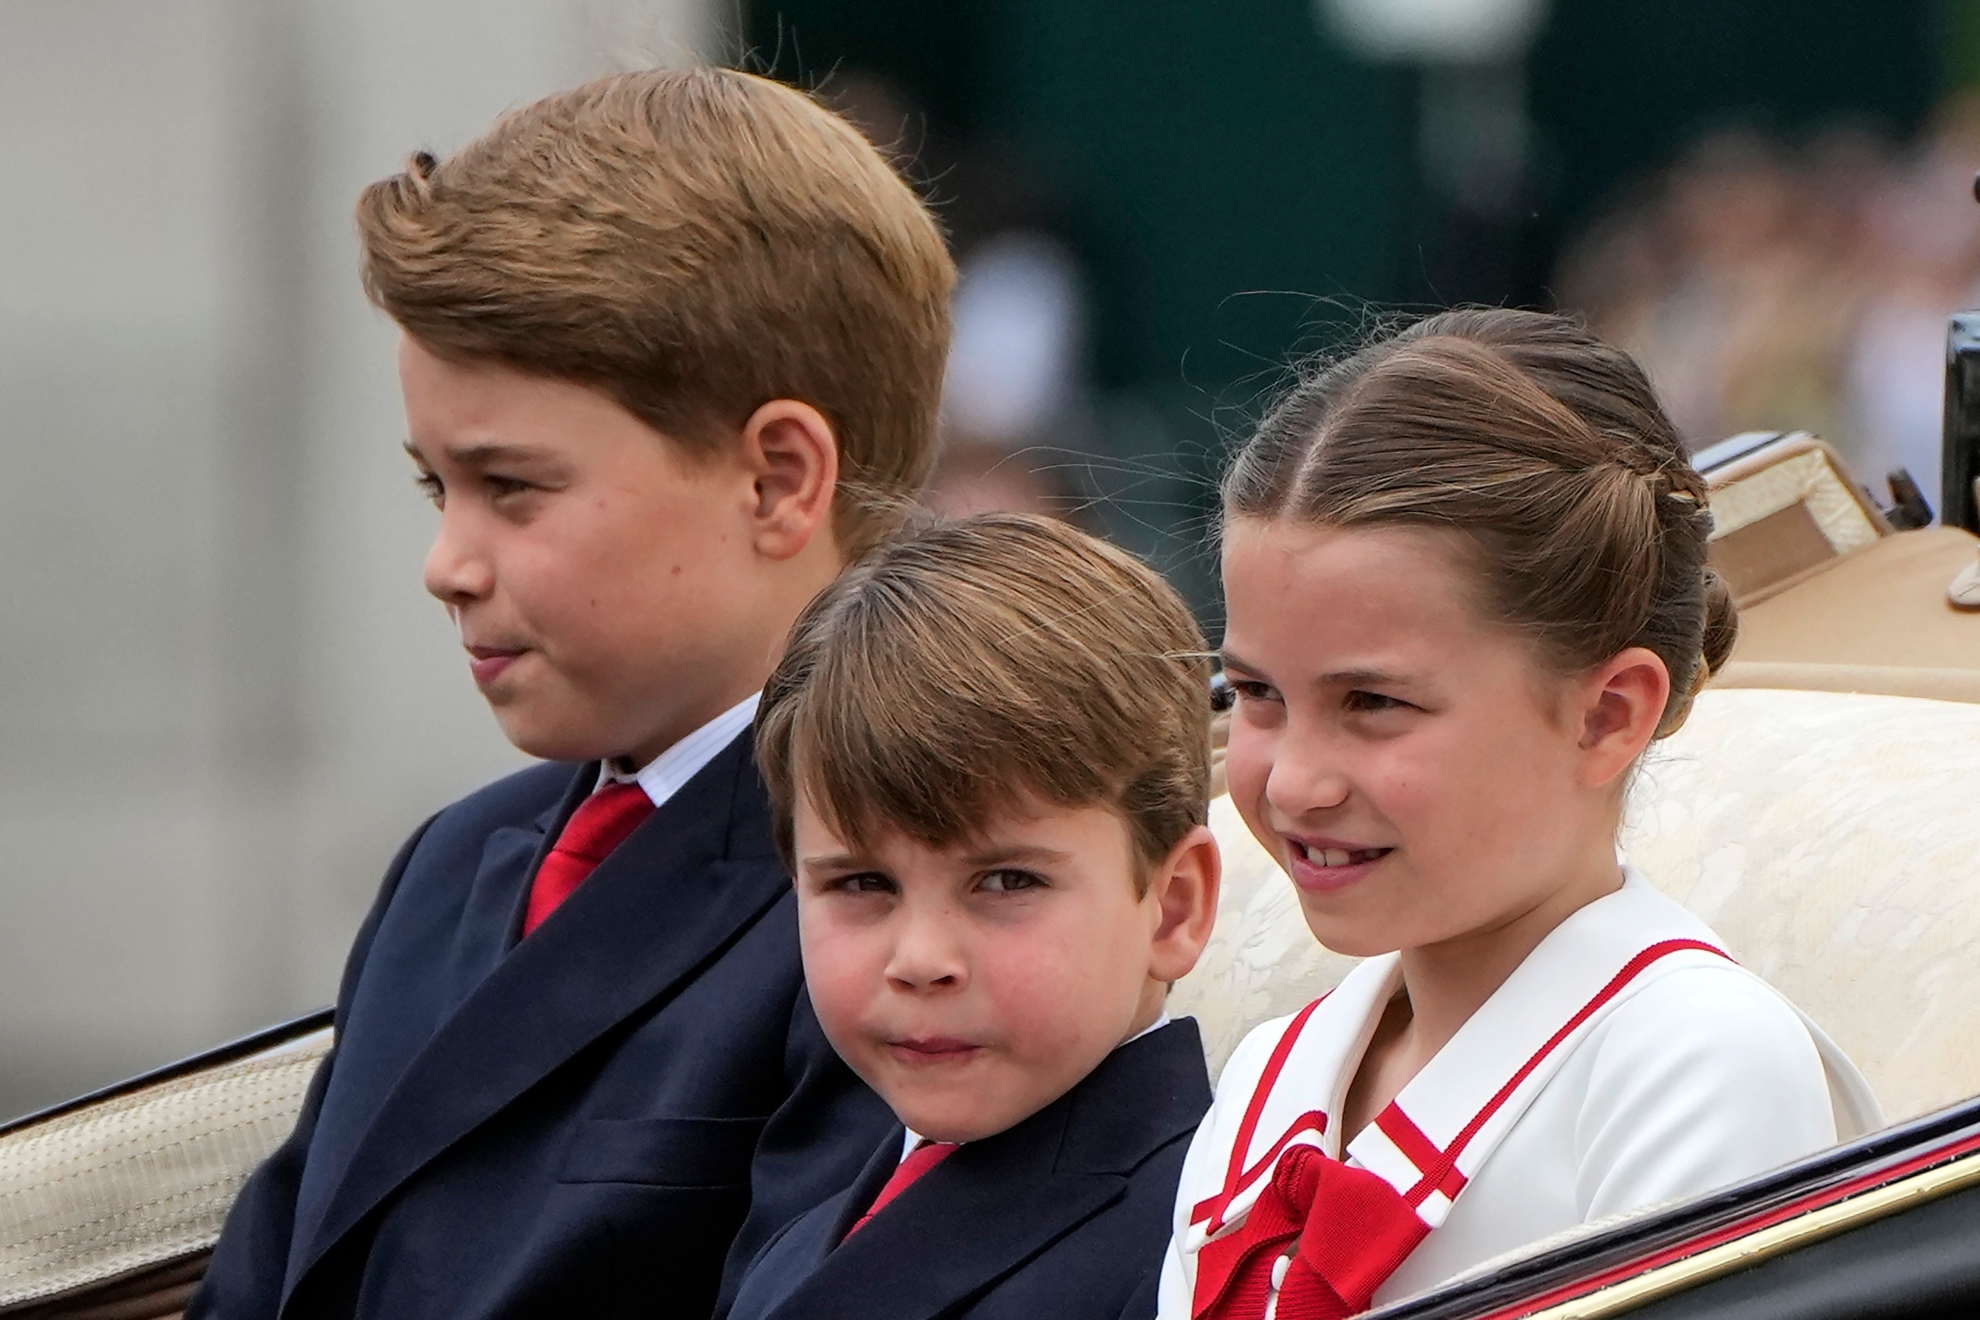 Unraveling the whimsical stories of young Royals mastering manners and culinary delights